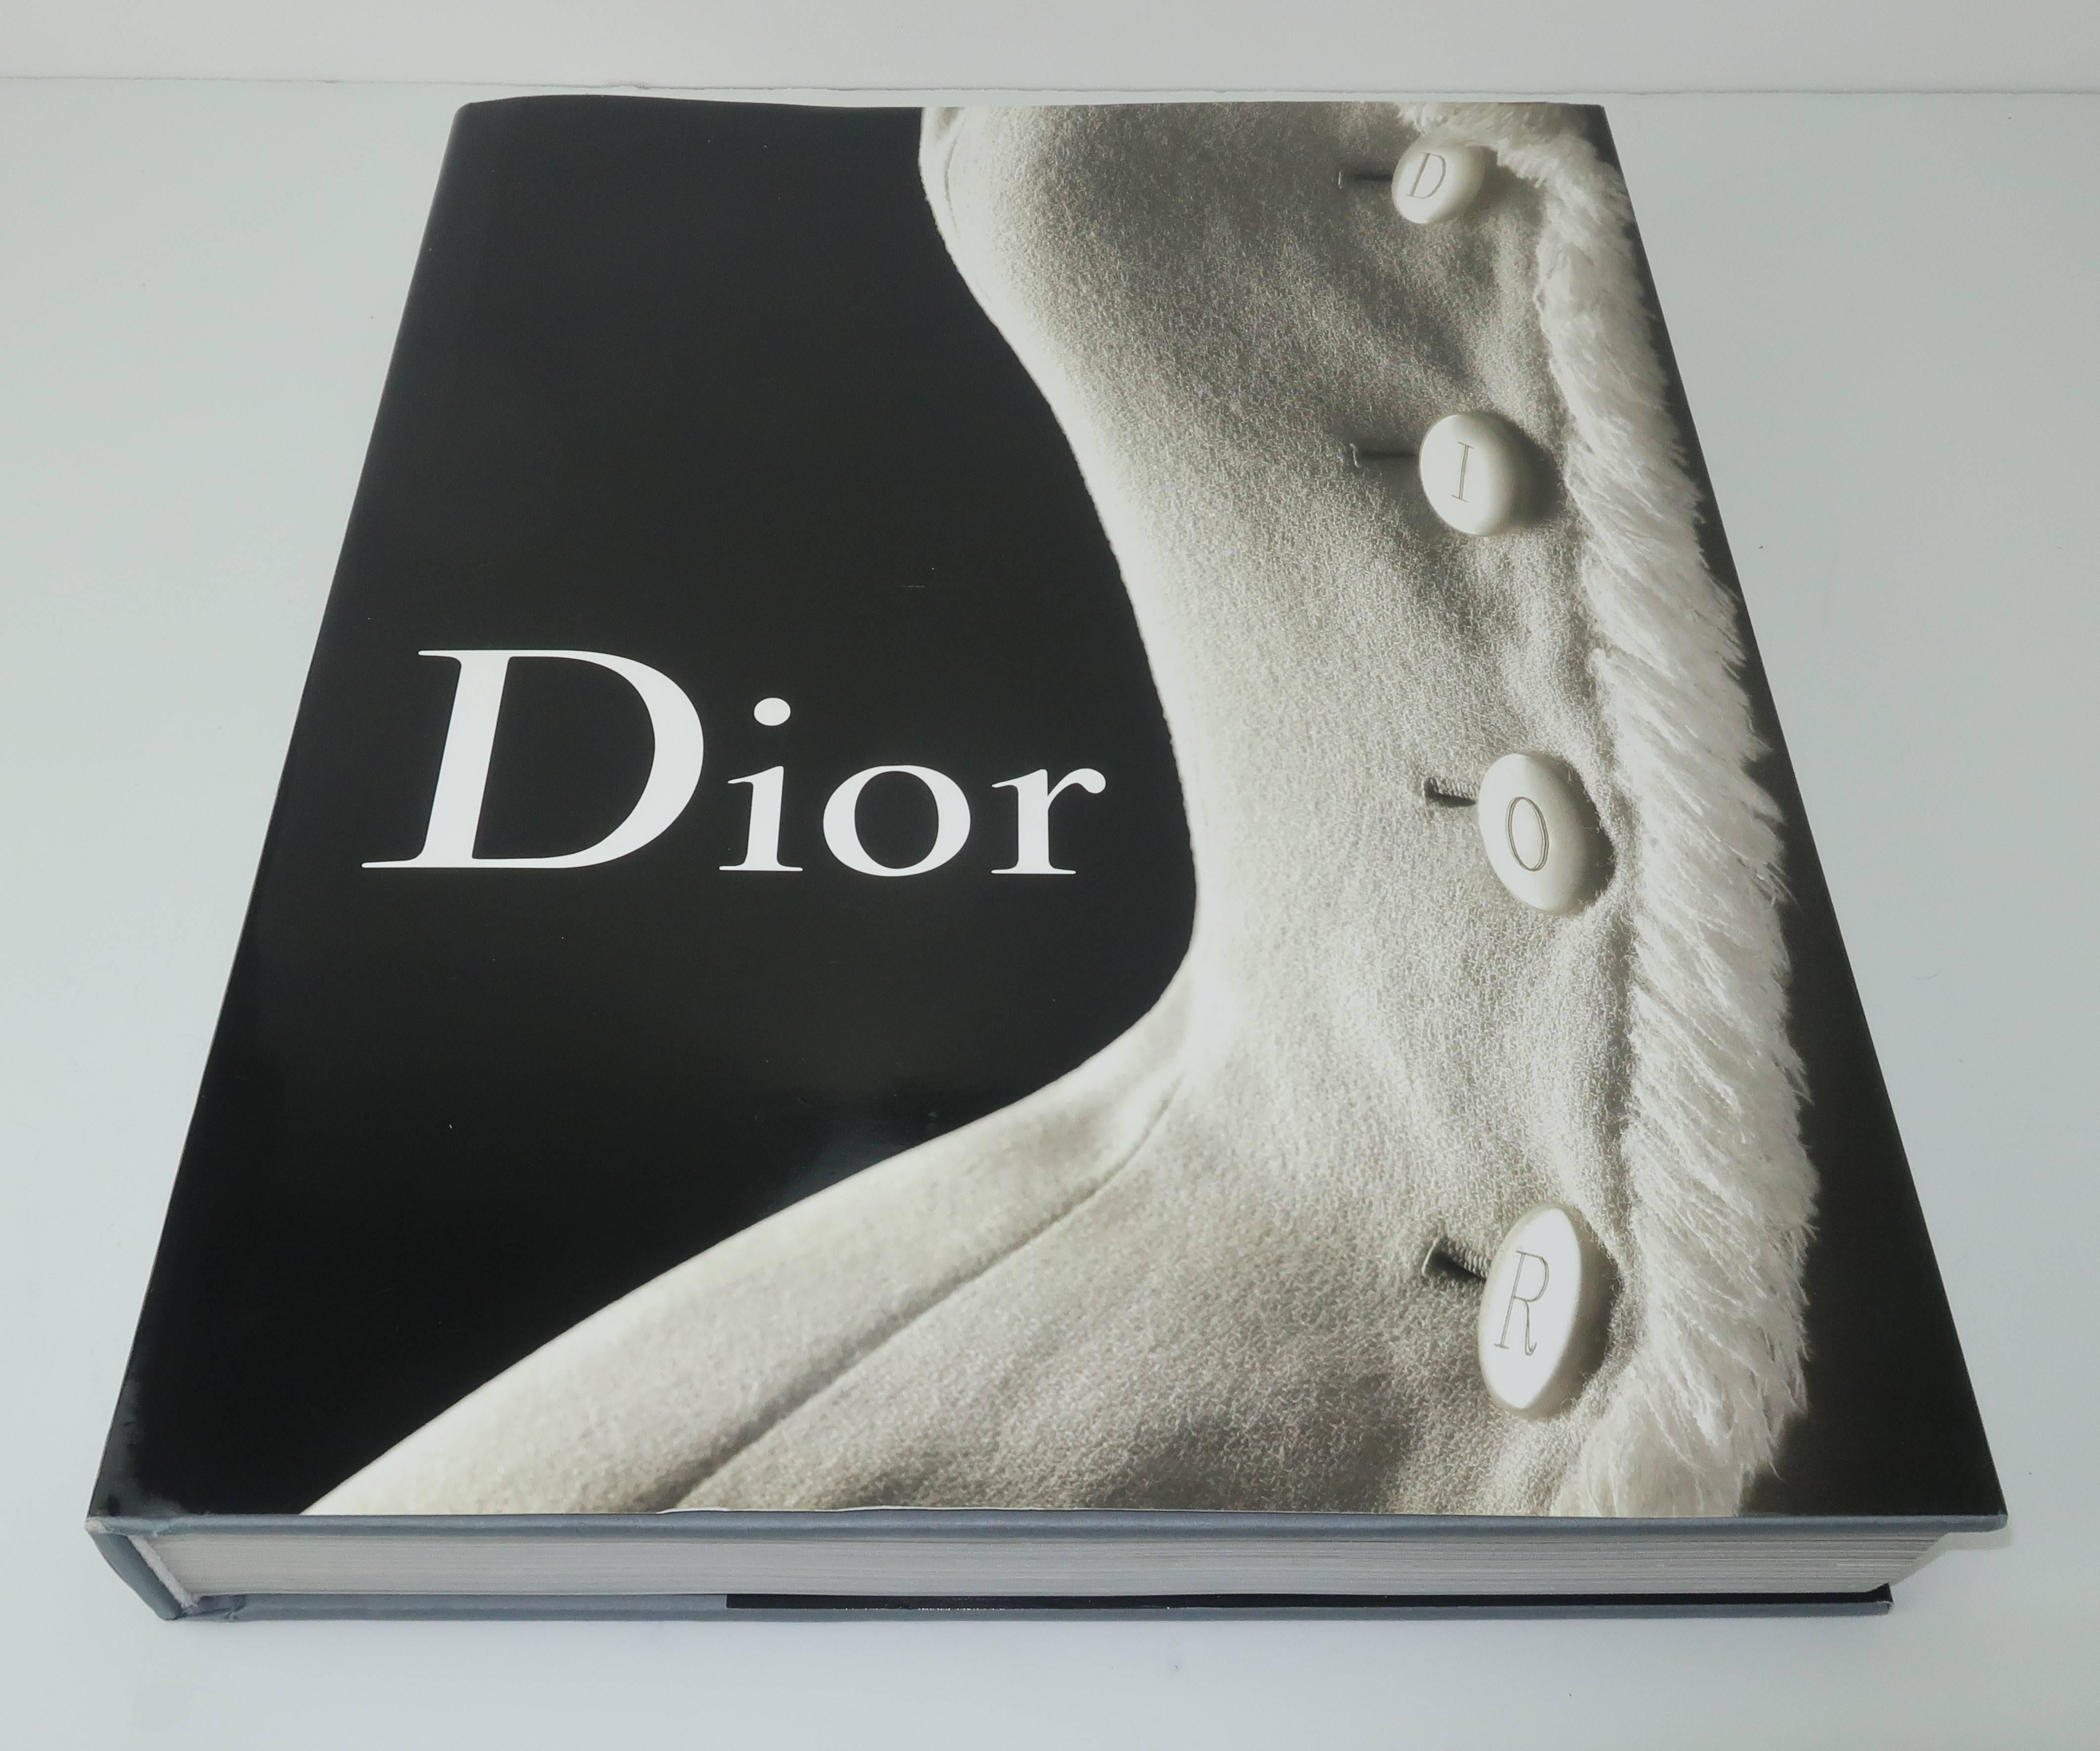 Enter the hallowed halls of one of the most revered names in fashion history ... past and present ... Christian Dior.  This beautifully published 383 page hardcover coffee table book printed by Assouline in 2007 is a treasure trove of photography